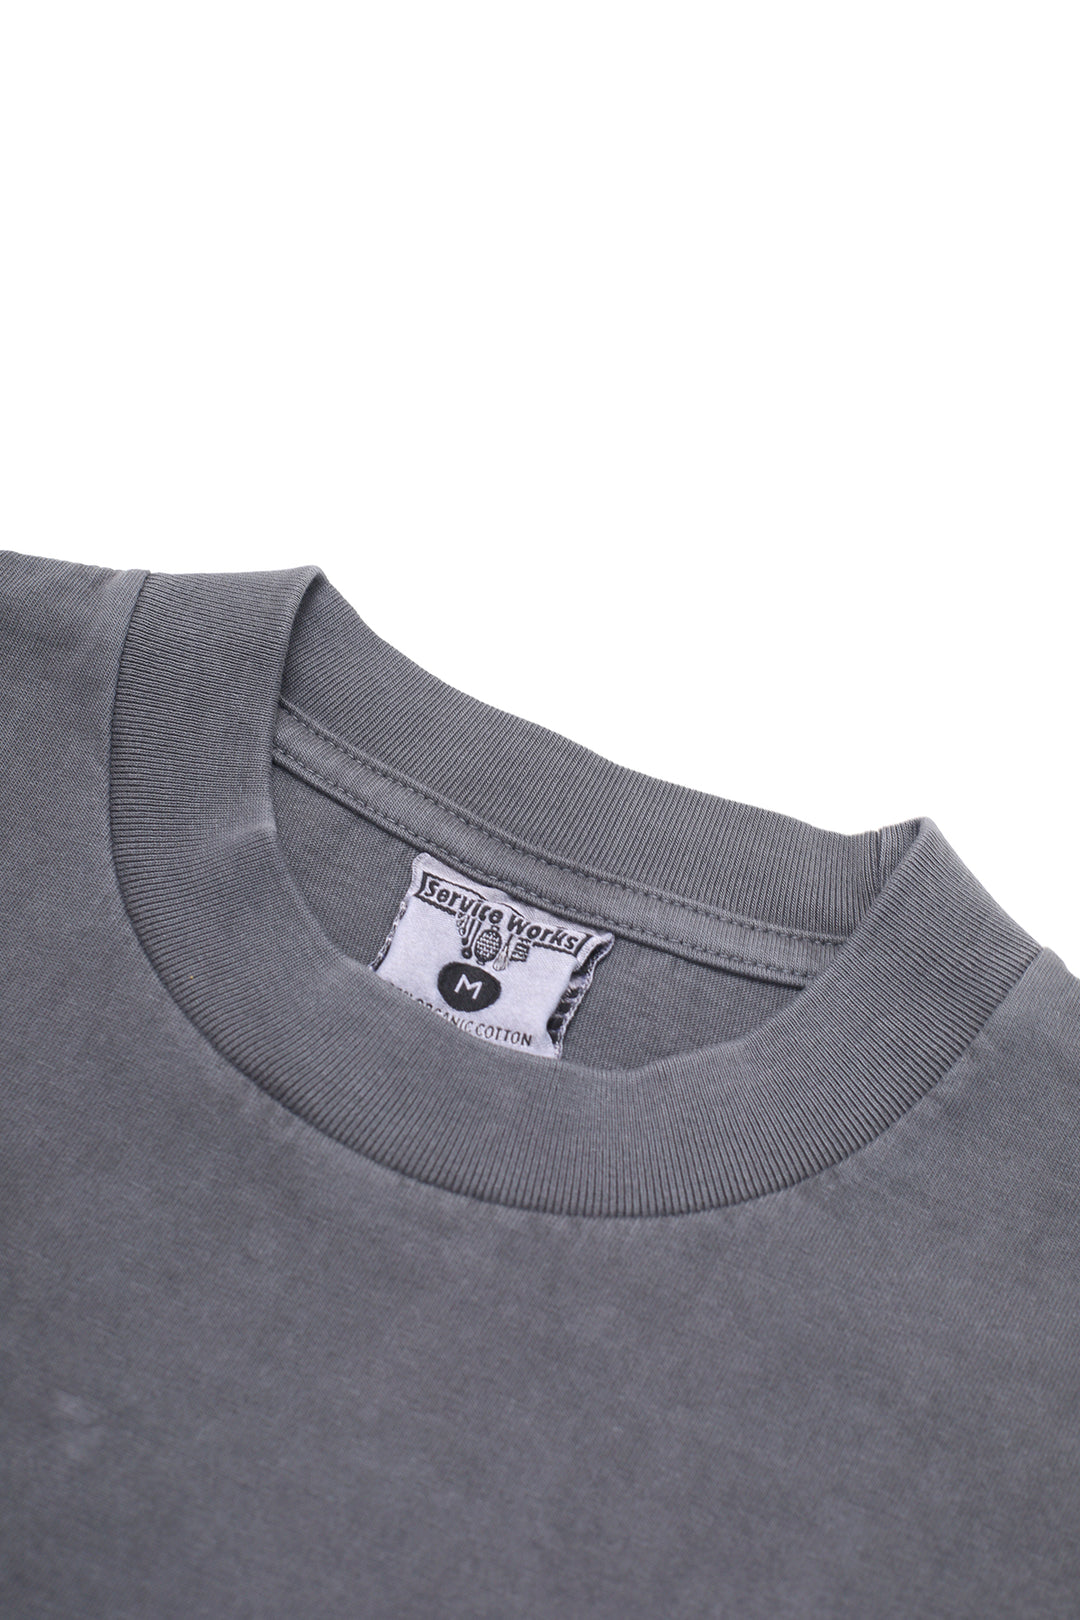 Service Works - Chase Tee - Charcoal